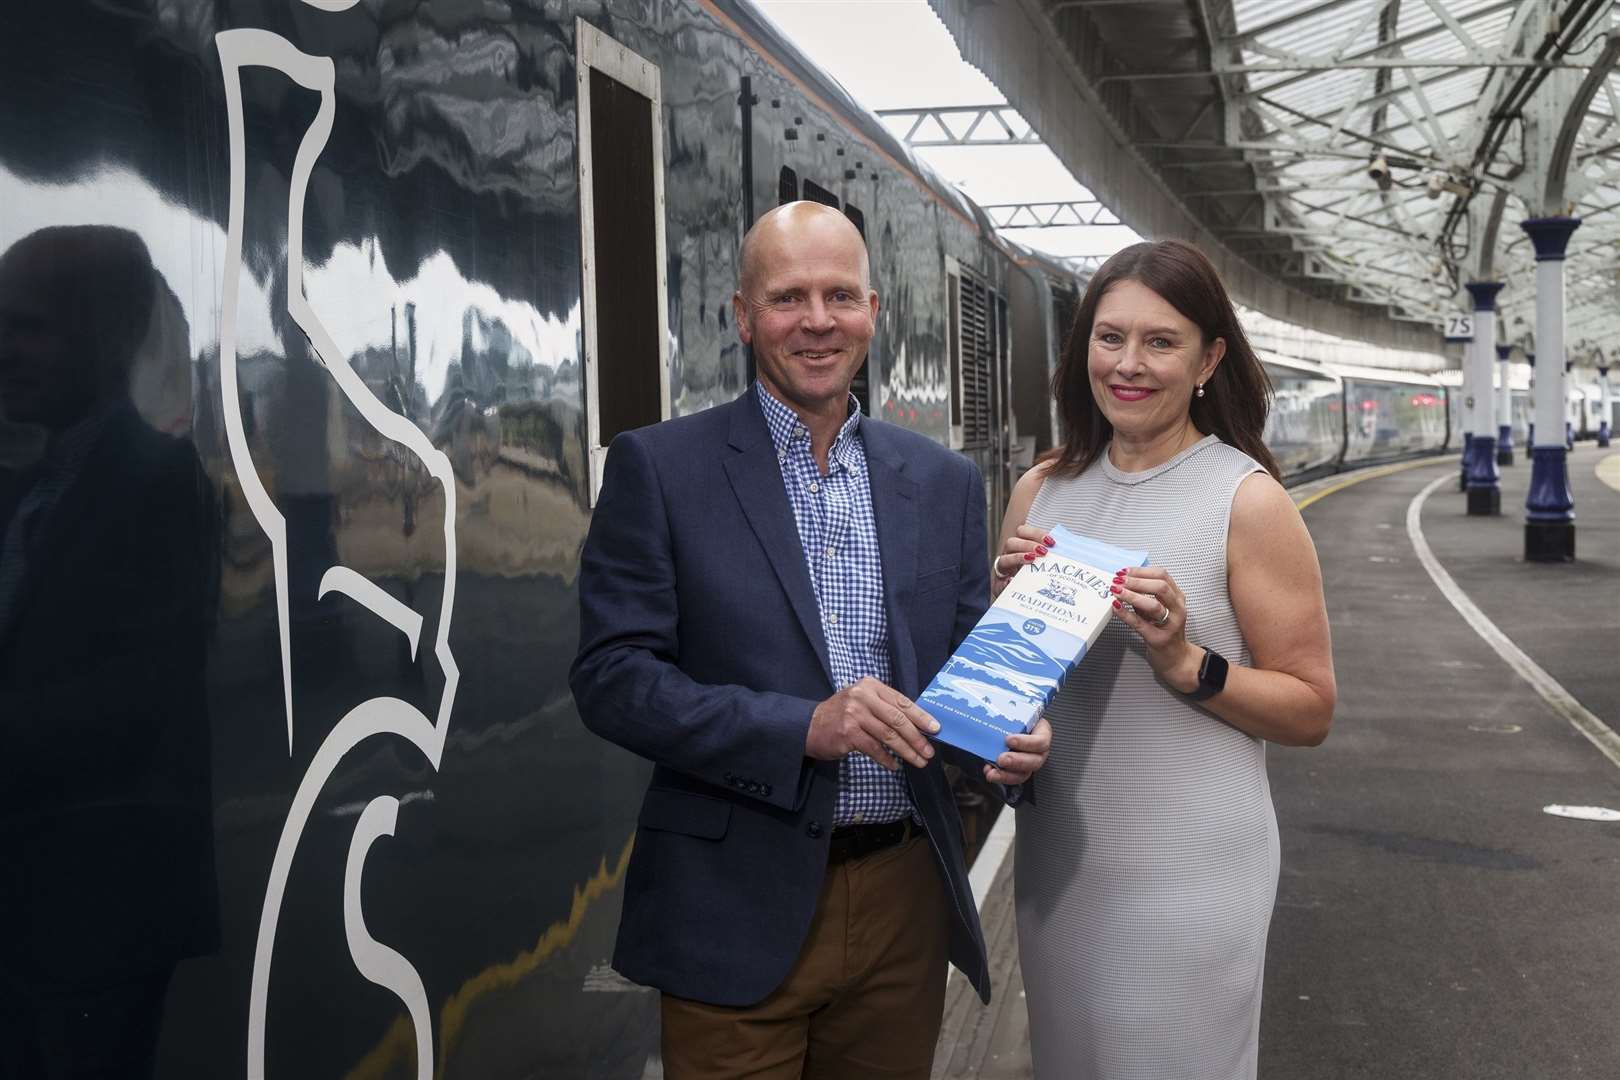 Caledonian Sleeper managing director Kathryn Darbandi with Mac Mackie, managing director of Mackie’s at the launch of the giveaway.